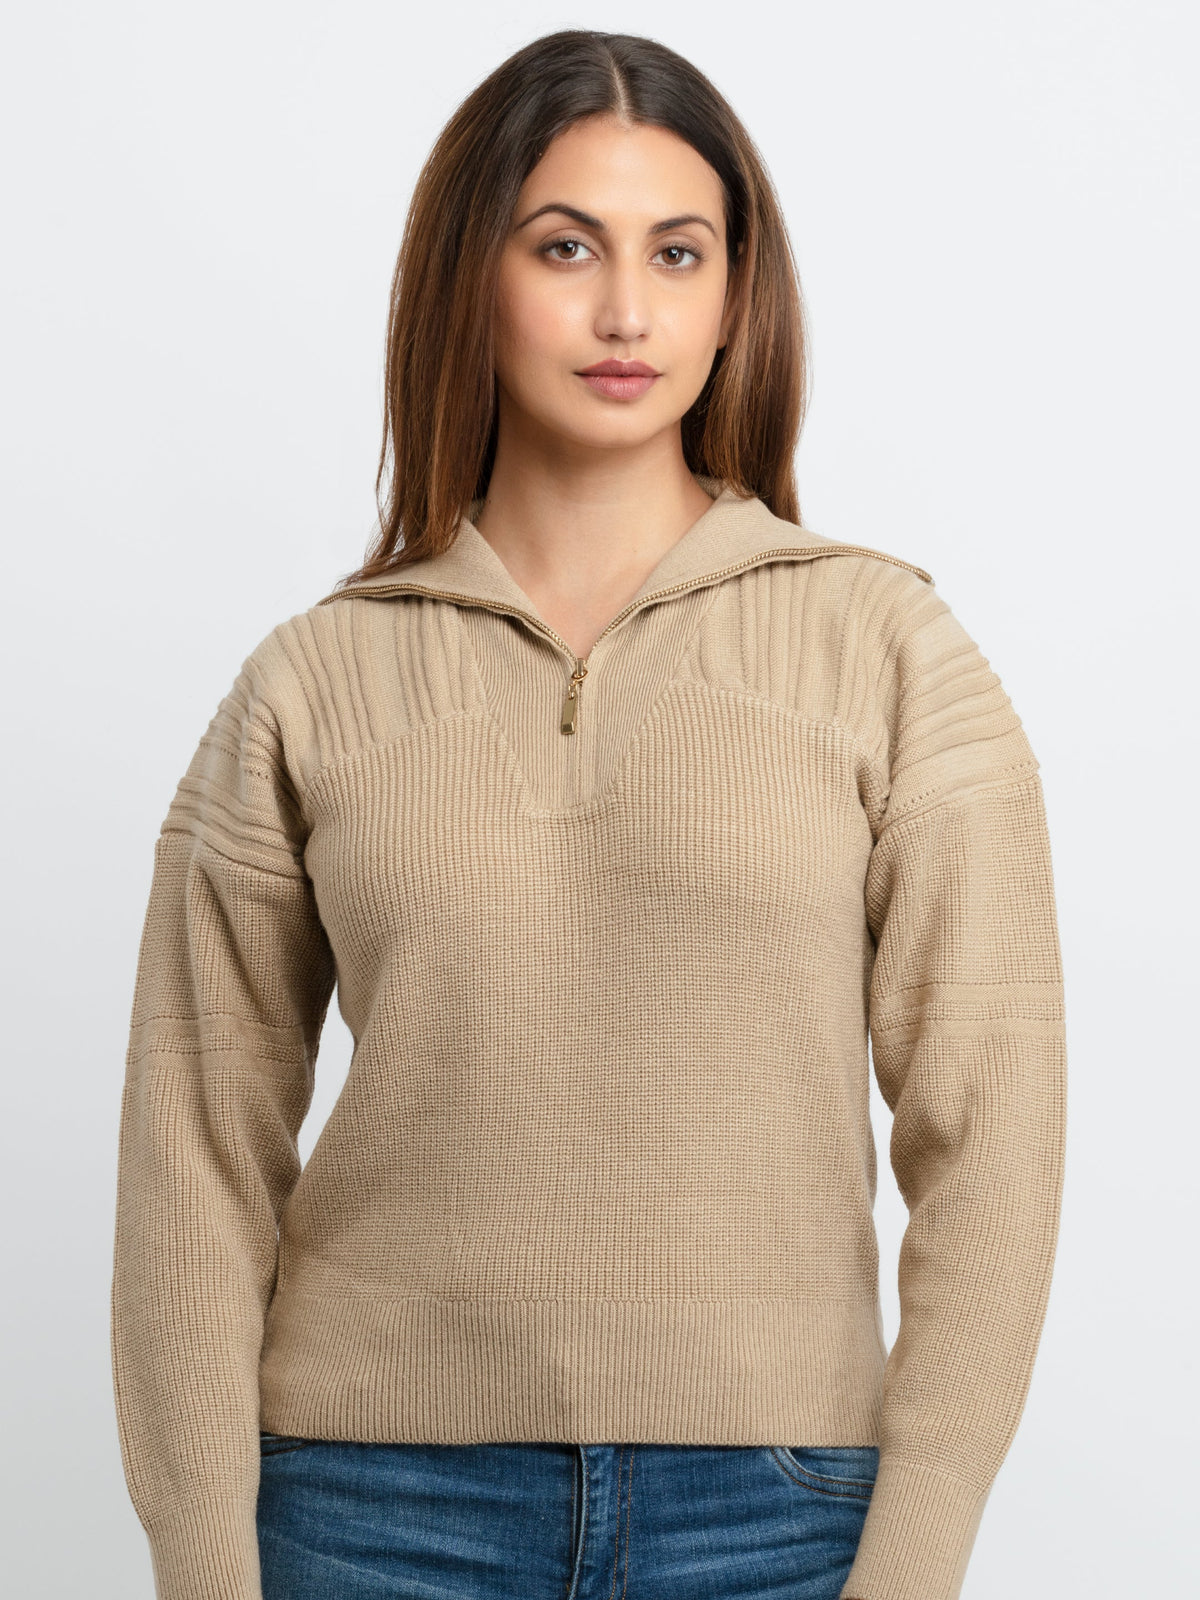 high neck sweater for women